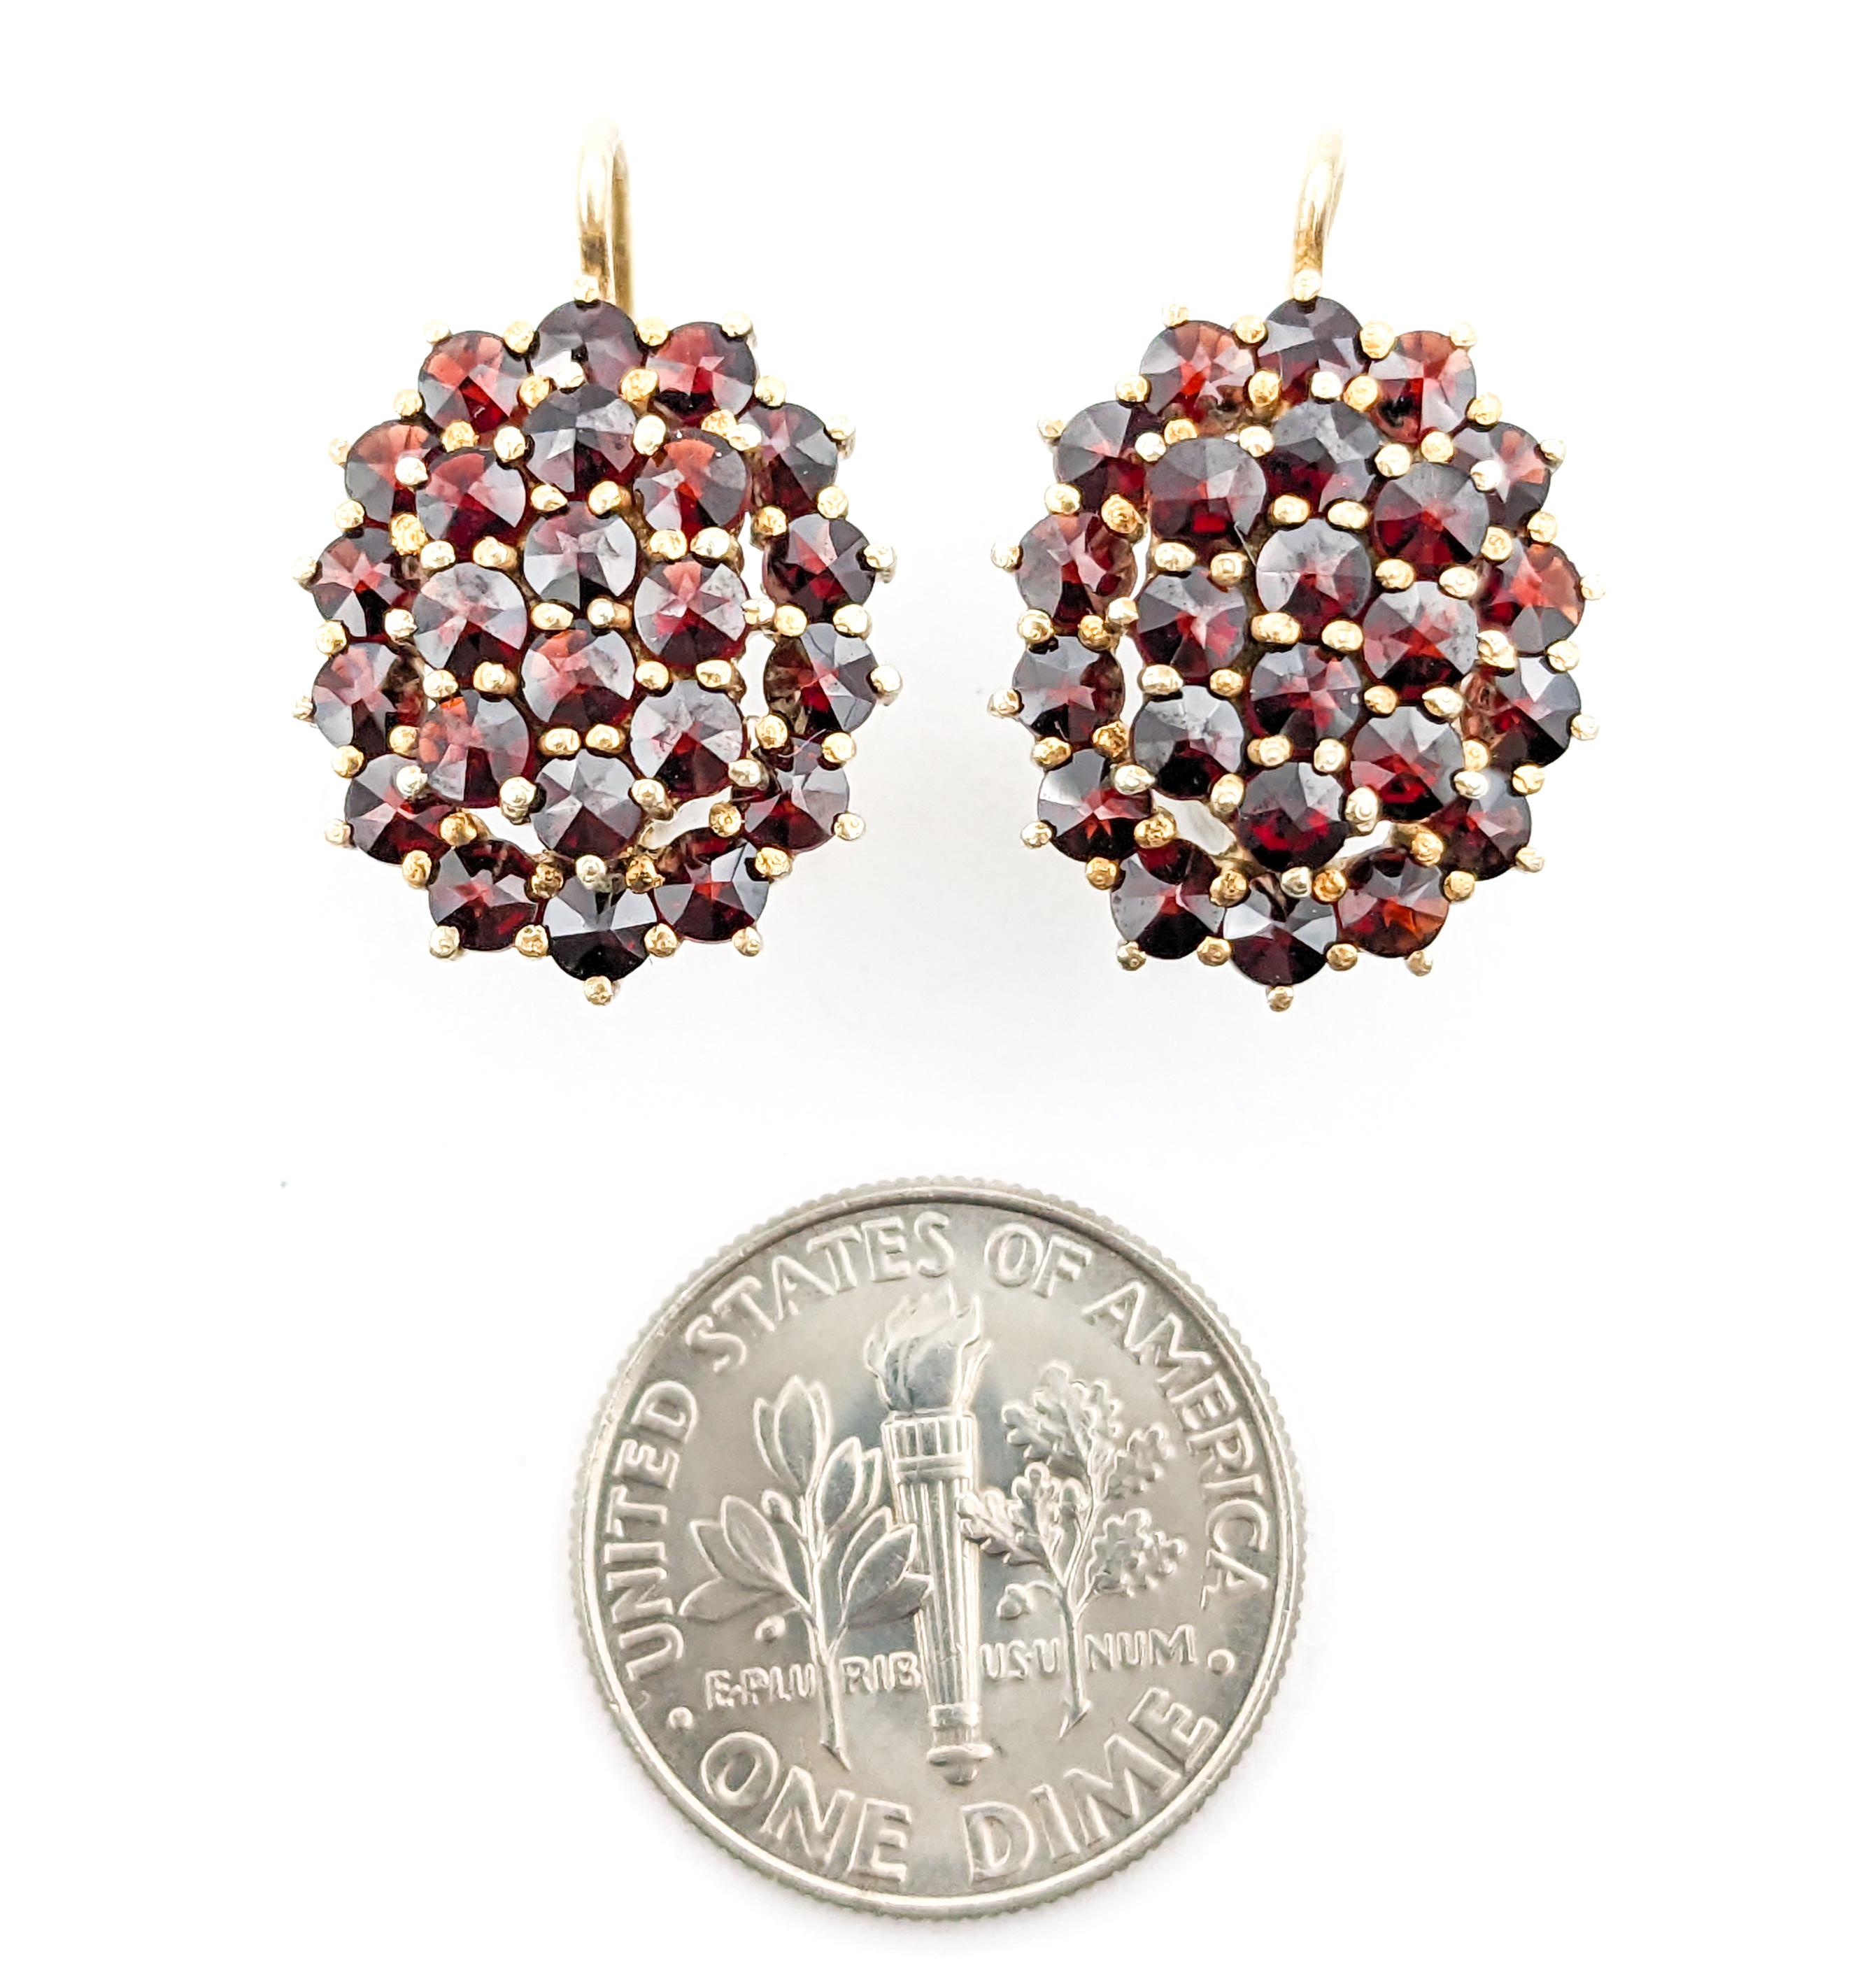 2.0ctw Garnets Vintage Earrings In Yellow Gold


Discover the timeless elegance of these Vintage Earrings, masterfully crafted in 18kt gold. Showcasing 2.0ctw of rich garnets, these earrings exemplify Mid Century design, blending classic style with